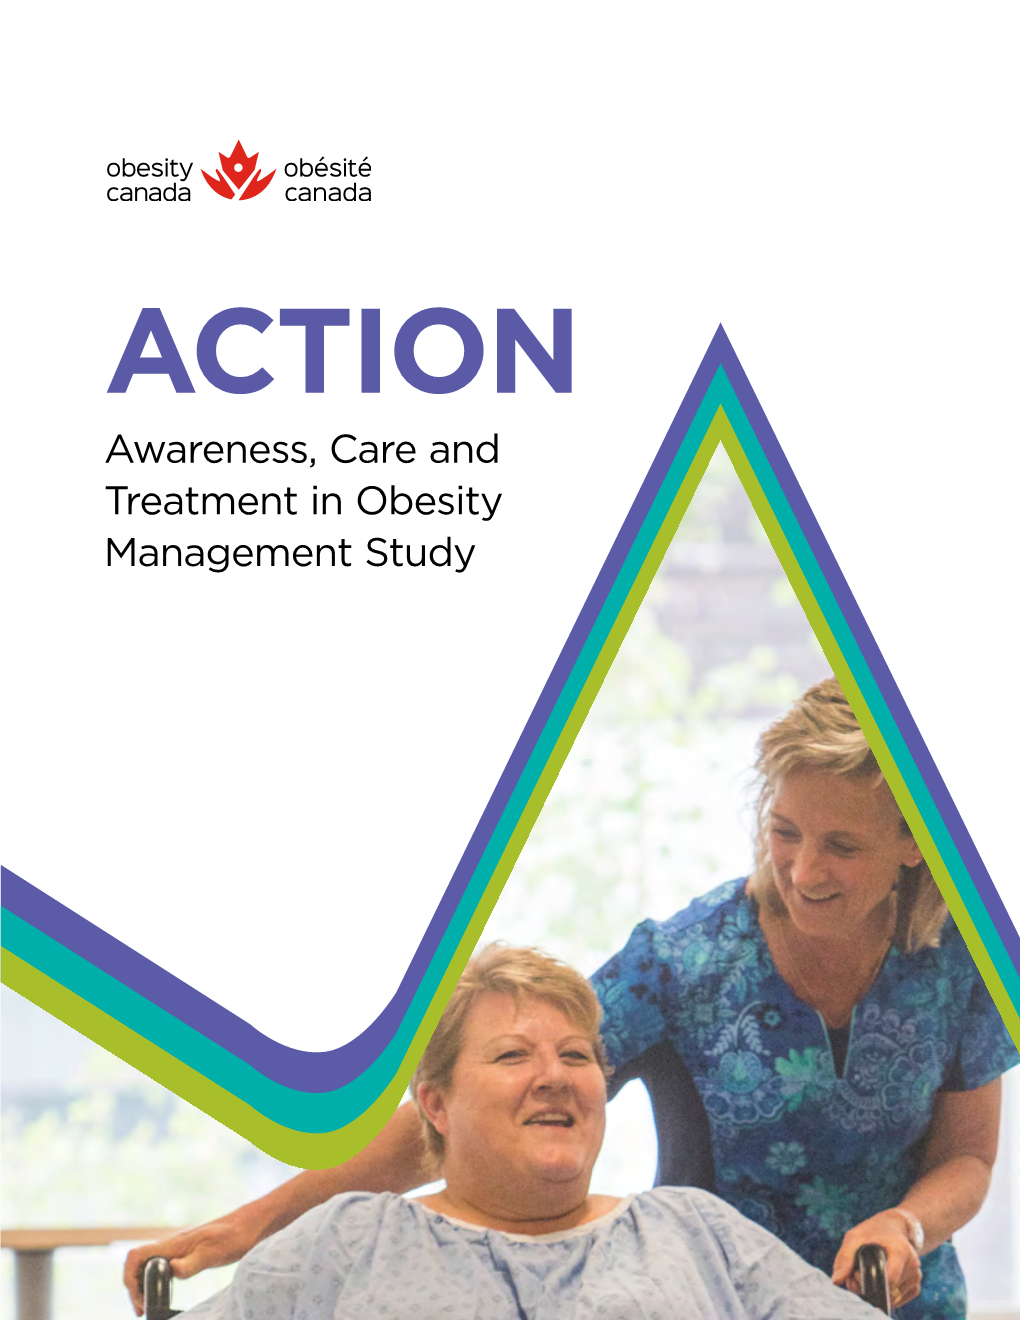 Awareness, Care and Treatment in Obesity Management Study